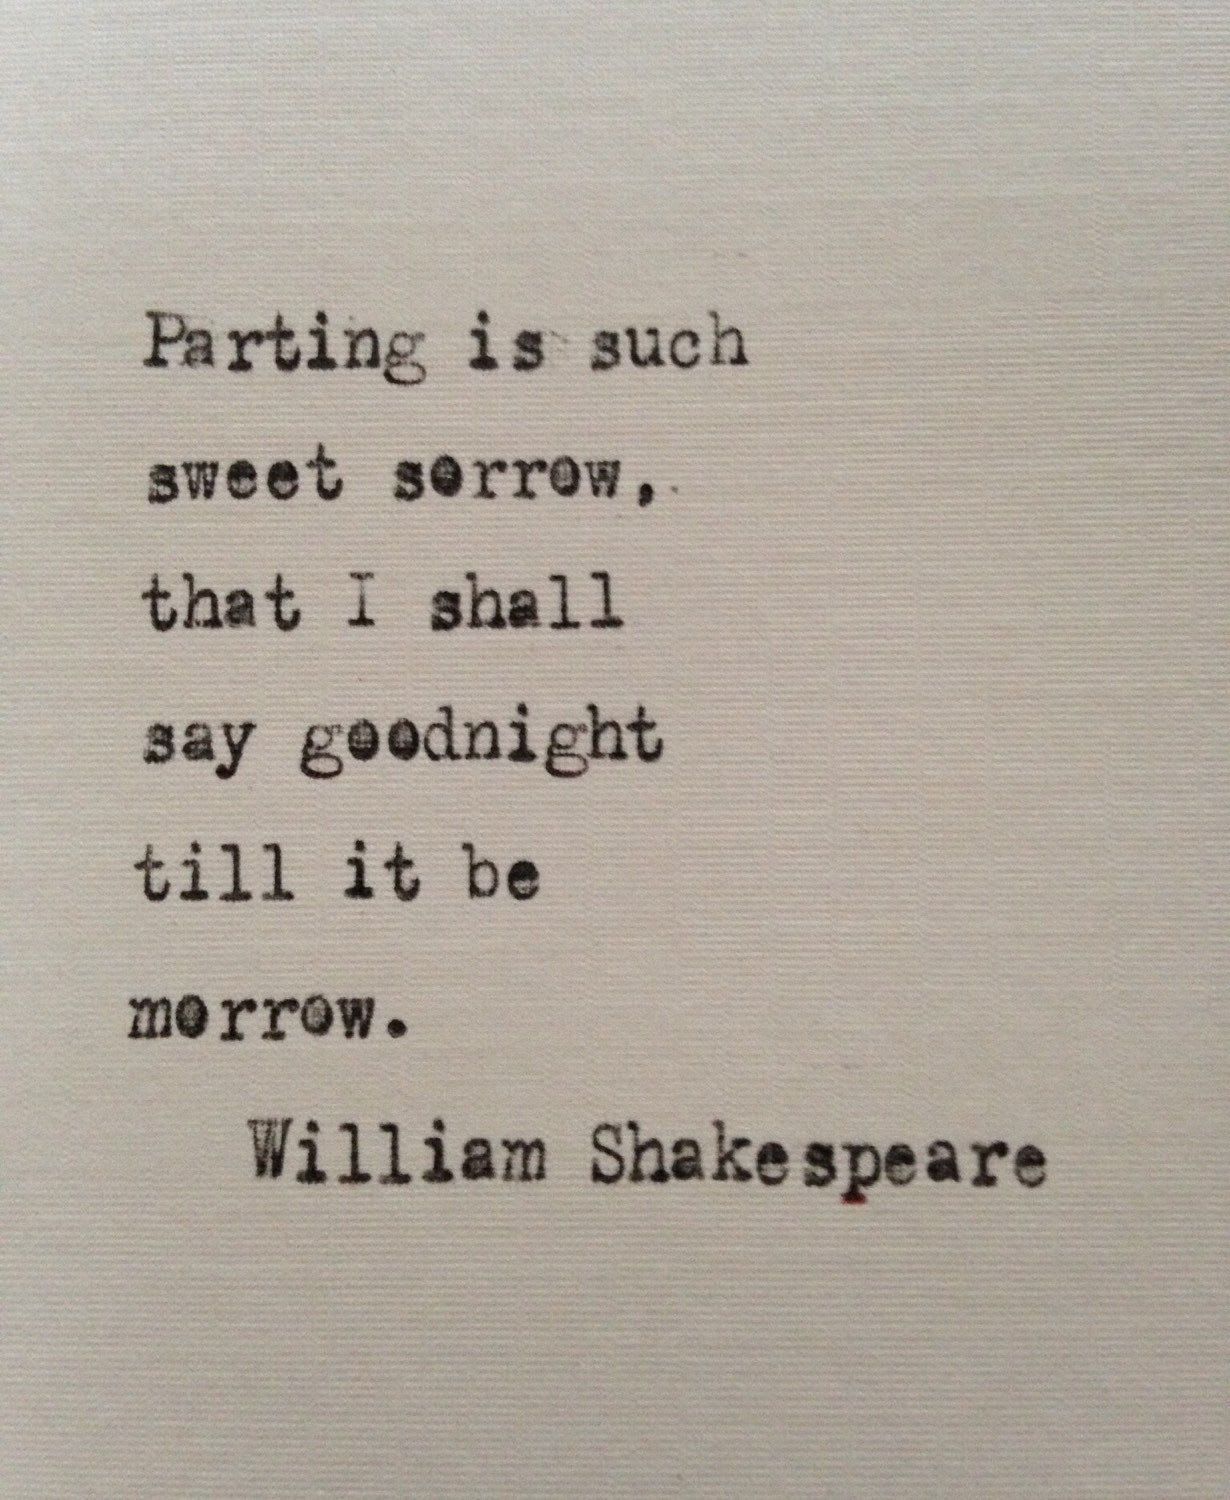 William Shakespeare Quote Hand Typed on an Antique Typewriter - Etsy